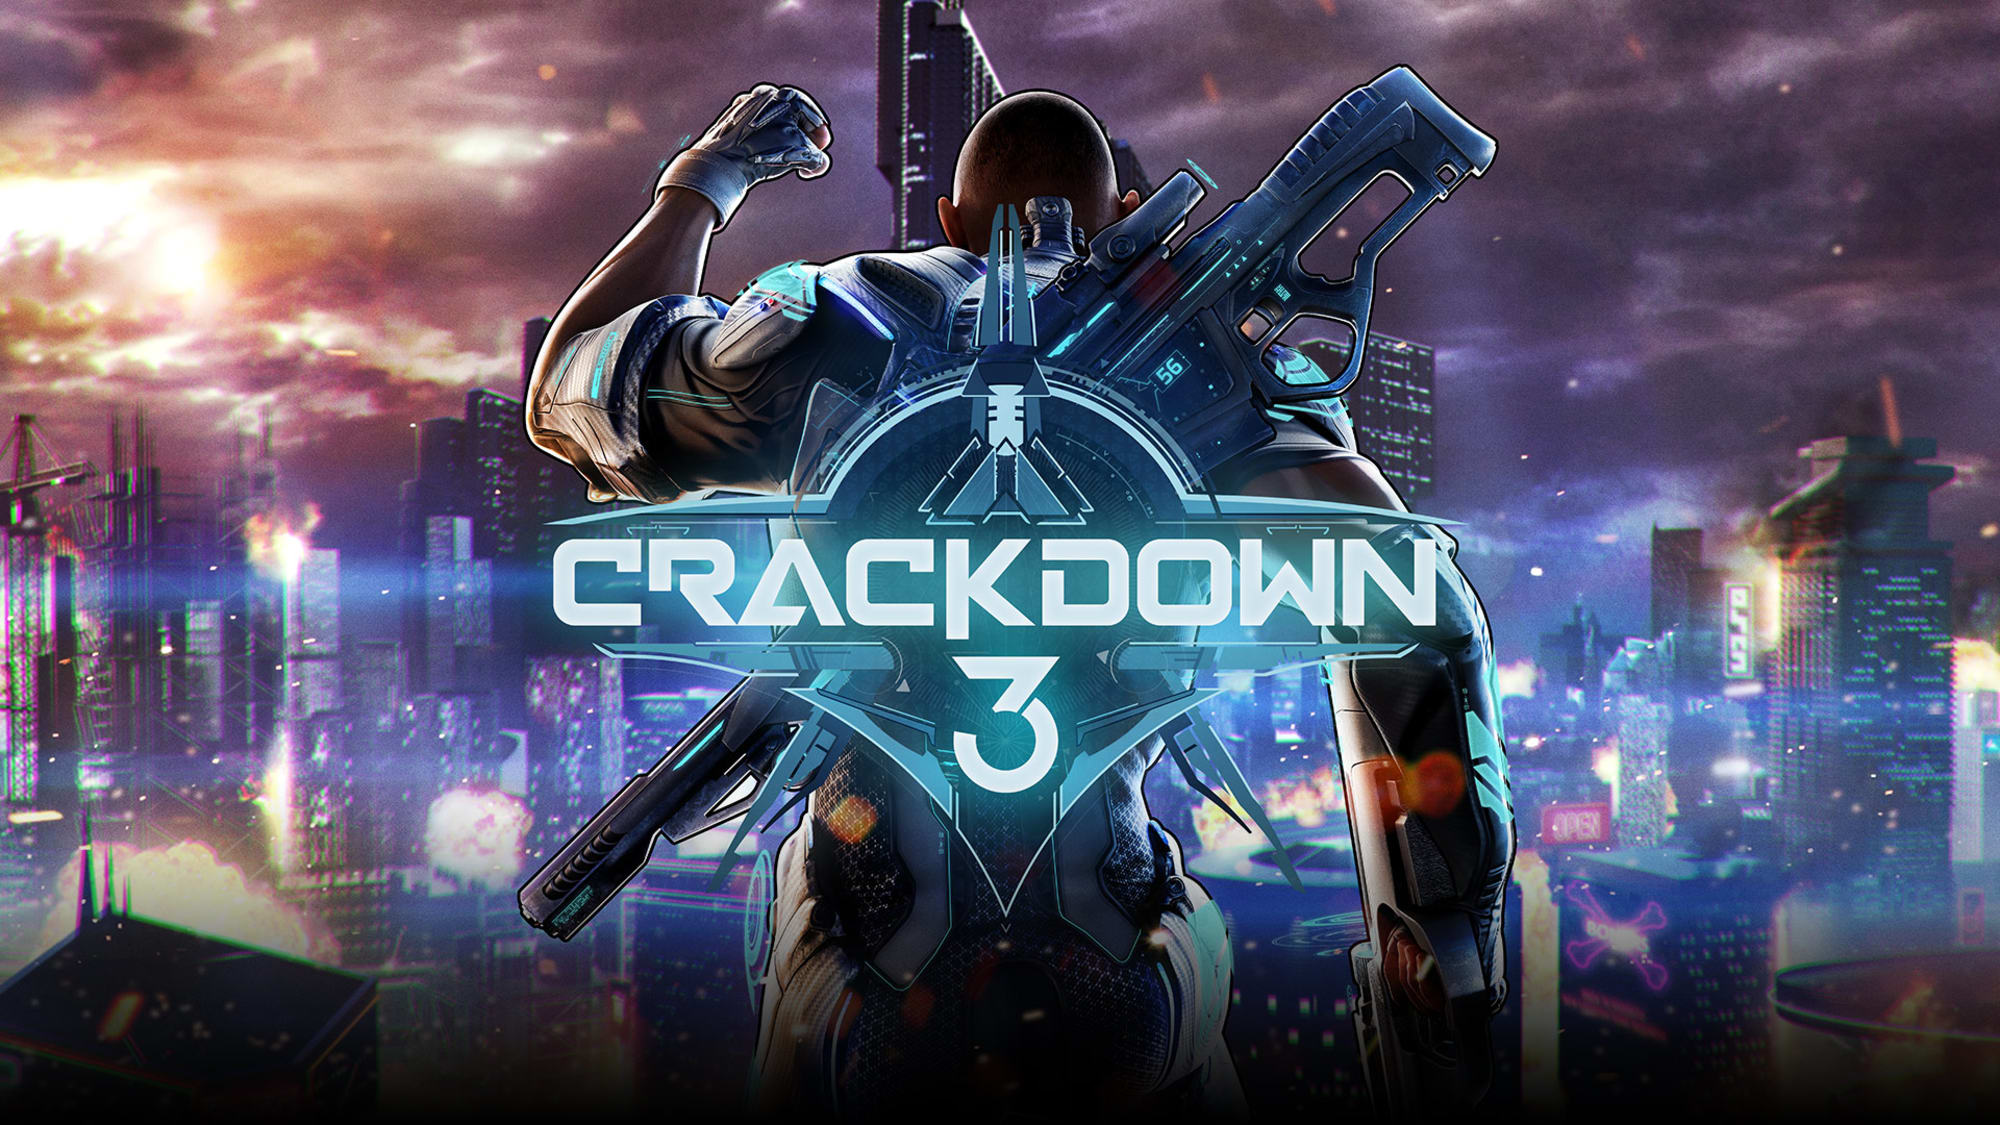 specifikation Tøj idiom Crackdown 3 review: Familiar for all the wrong reasons